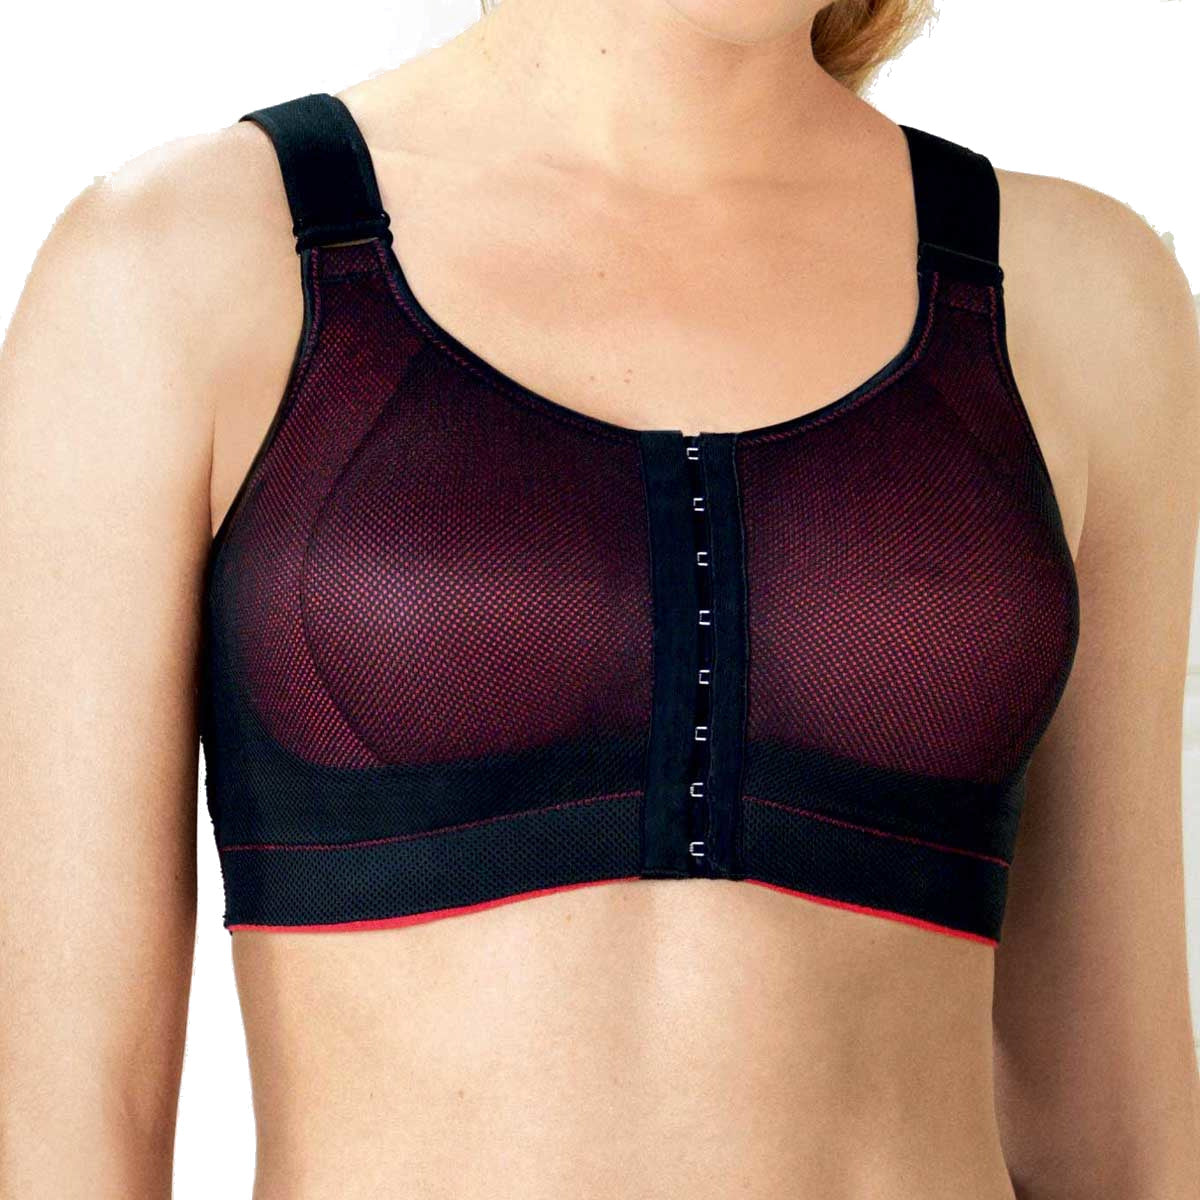 Buy Women's Adjustable Sports Front Closure Extra-Elastic Breathable Lace  Trim Bra (85C,Beige) at